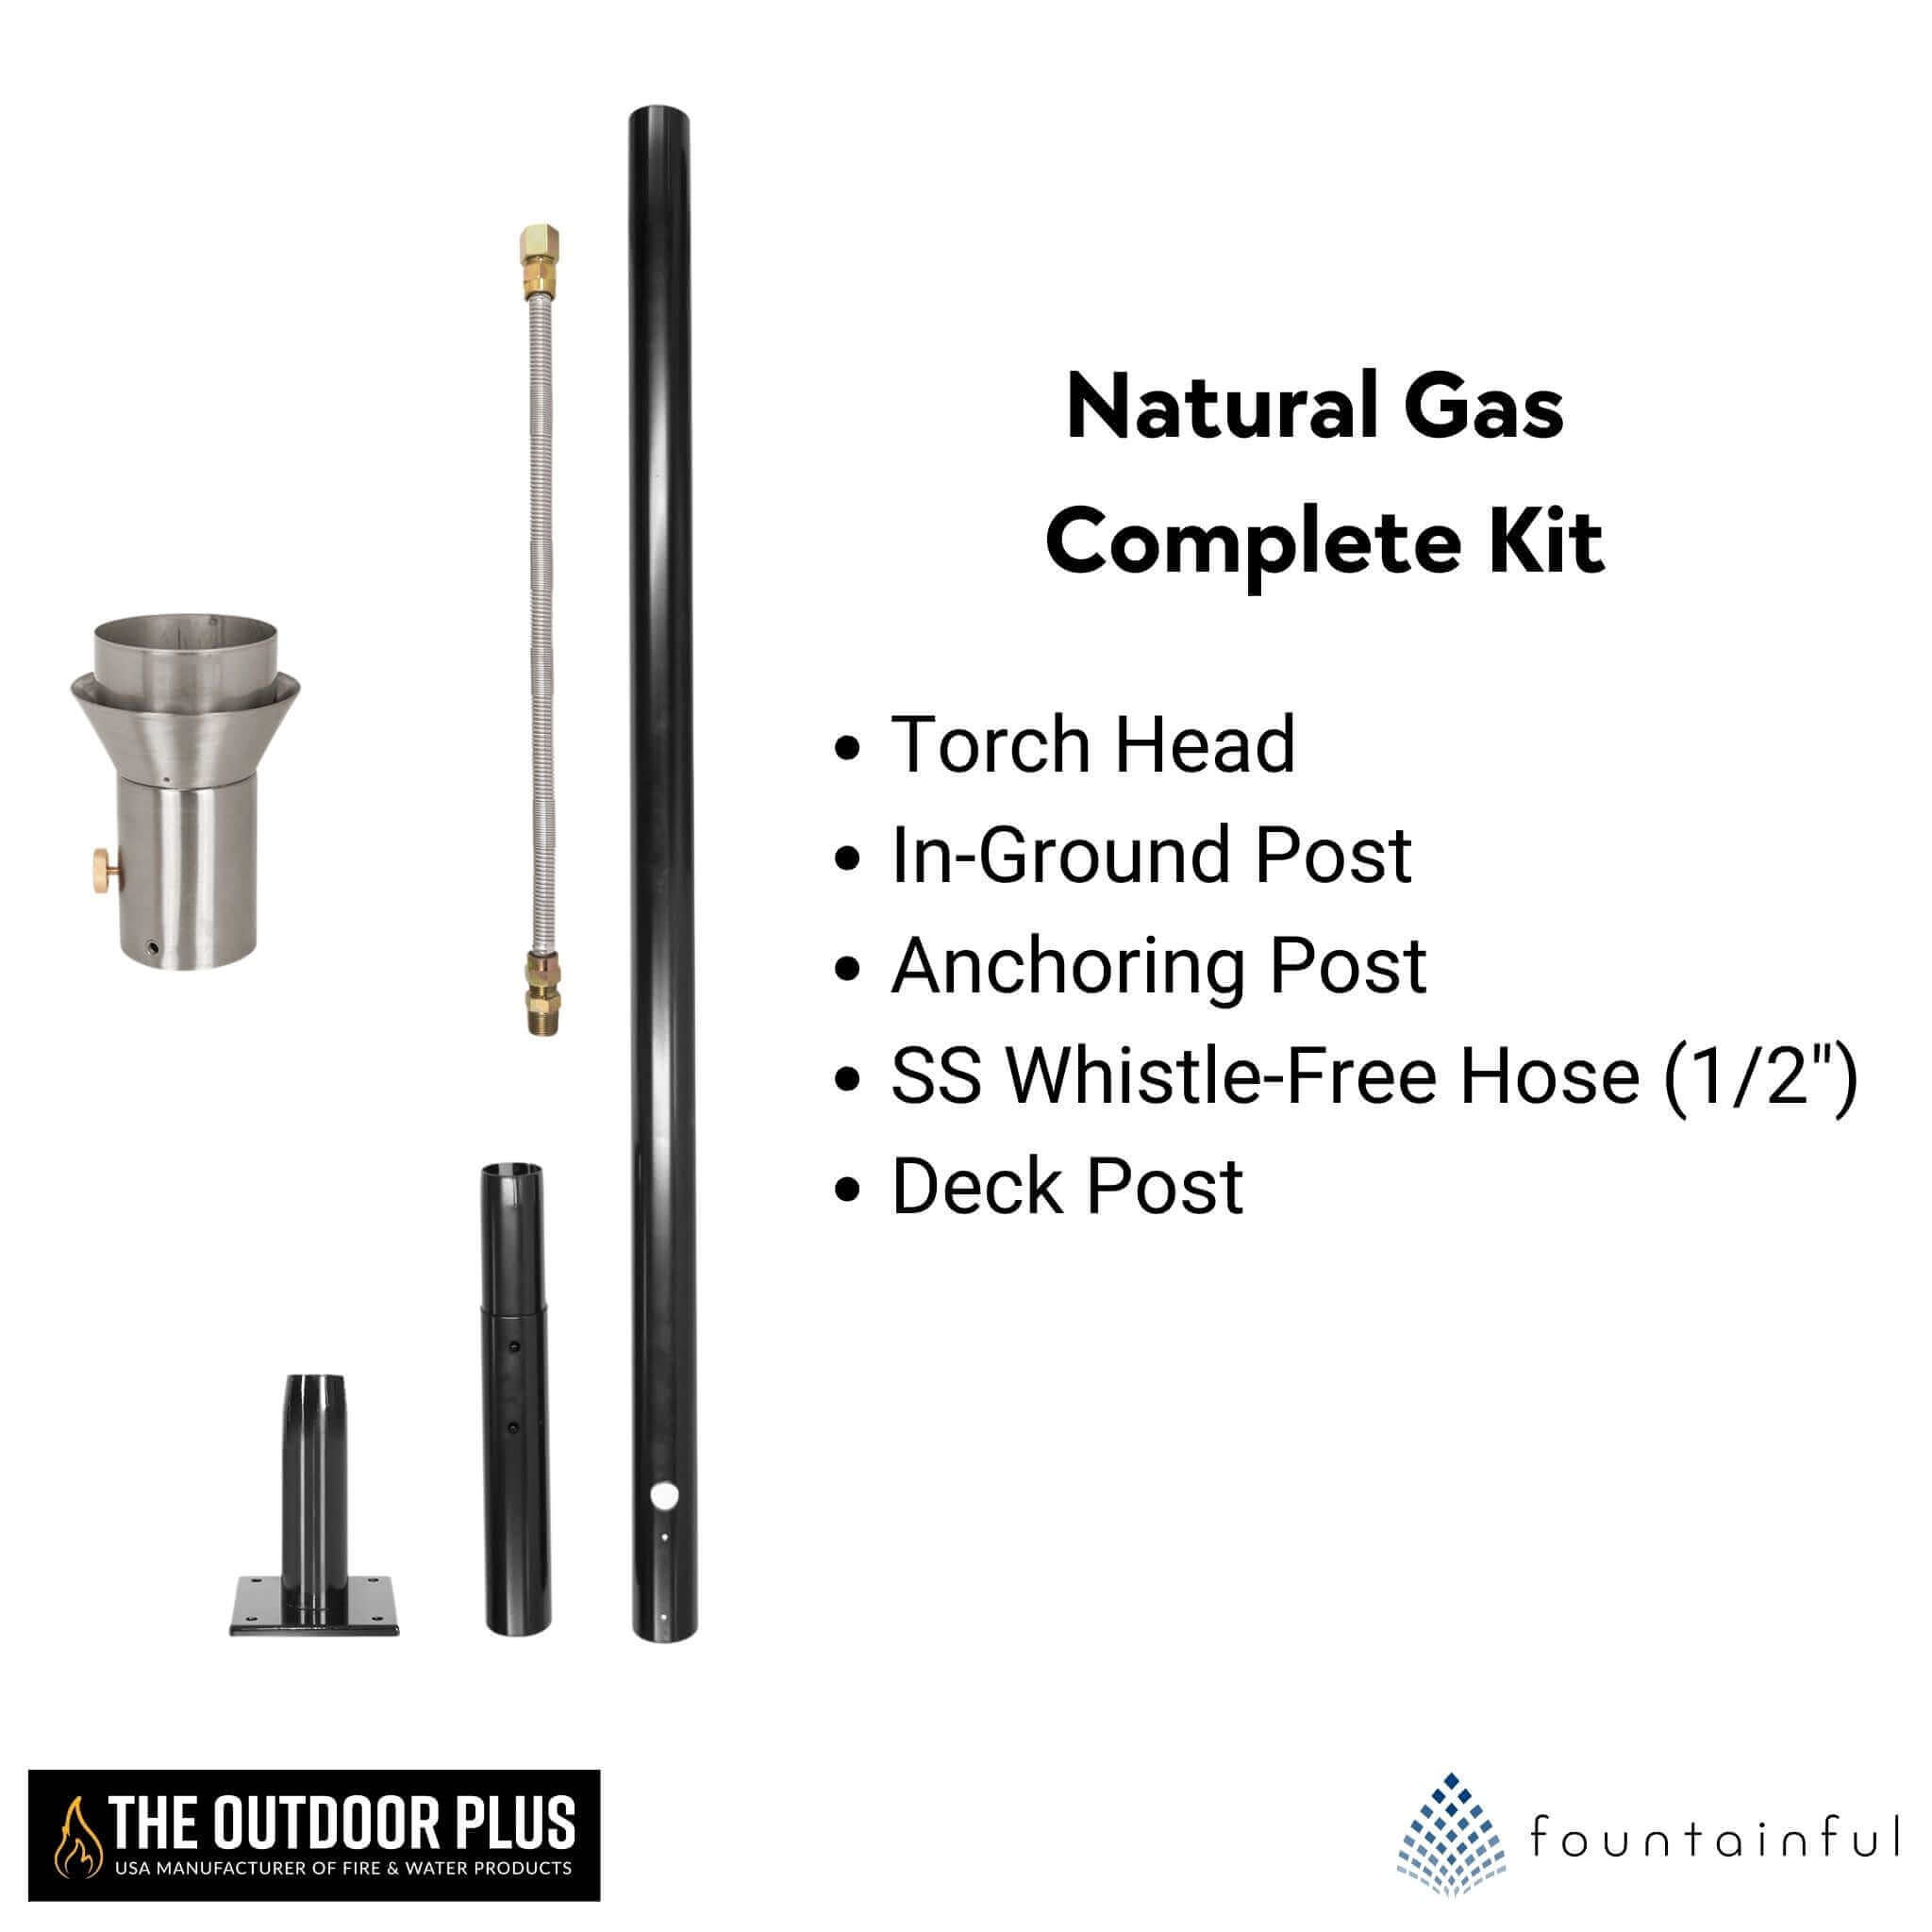 Woven Fire Torch COMPLETE KIT - Stainless Steel - The Outdoor Plus